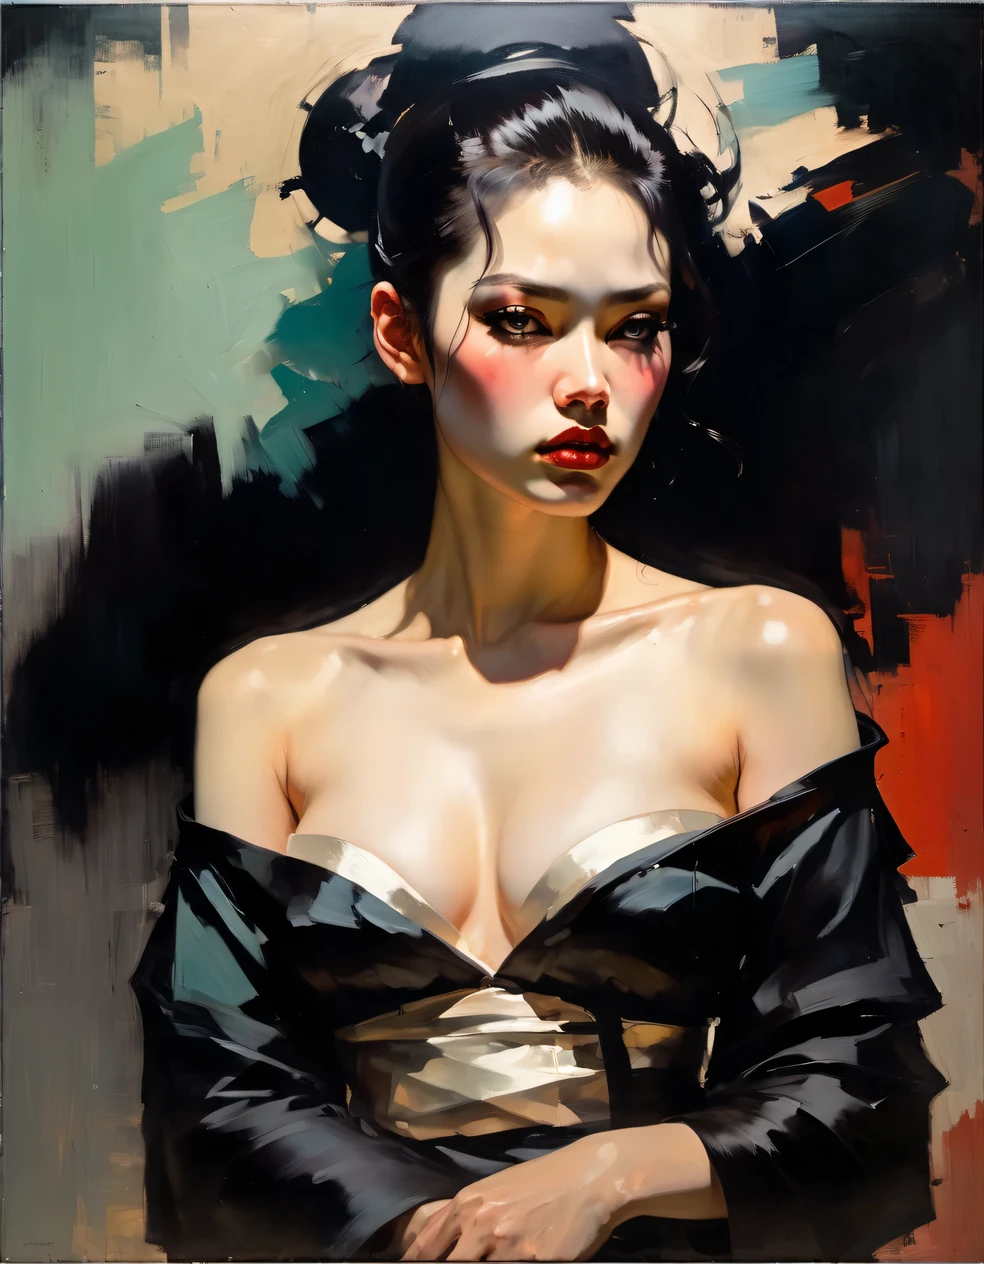 malcolm liepke painting on sensual illustration of an elegant samurai, riot games concept art beauty, eerie, the model draped in flowing, thick oil painting, extremely soft colors, vibrant, highly detailed, , oil on linen,  high contrast, dramatic, refined, tonal, Create high contrast between light and shadow, impactful paint of portrait of a man  highly detailed,   8k,   sharp,  professional, clear,   high contrast, high saturated, , vivid deep blacks, crystal clear